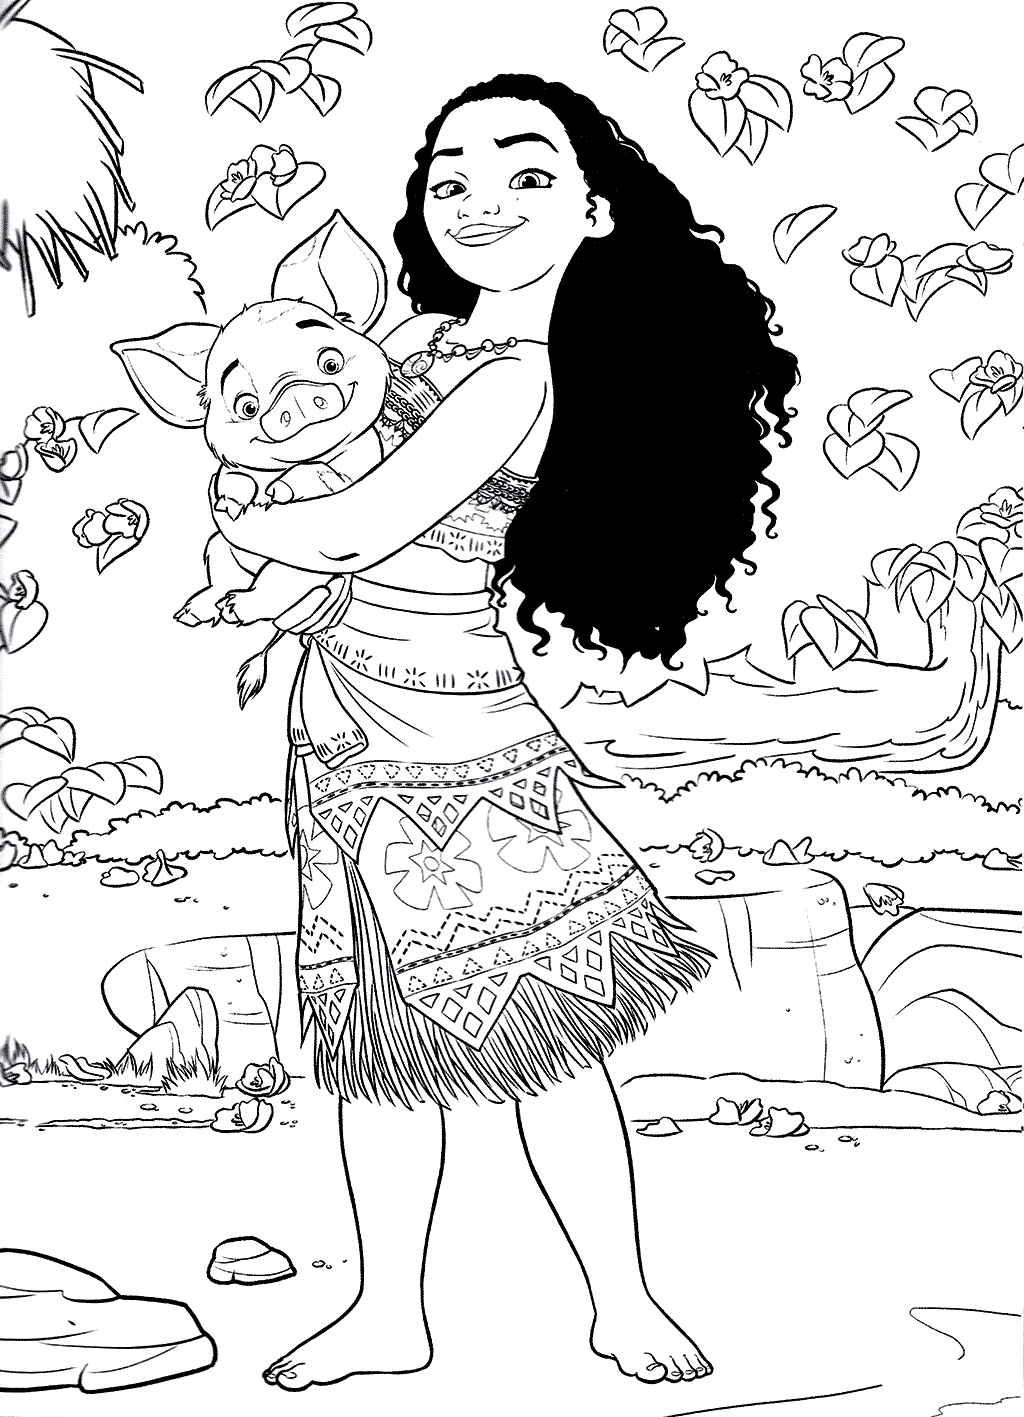 Top 10 Moana Coloring Pages- Free Printables | Free Coloring Pages - Moana Coloring Pages Free Printable